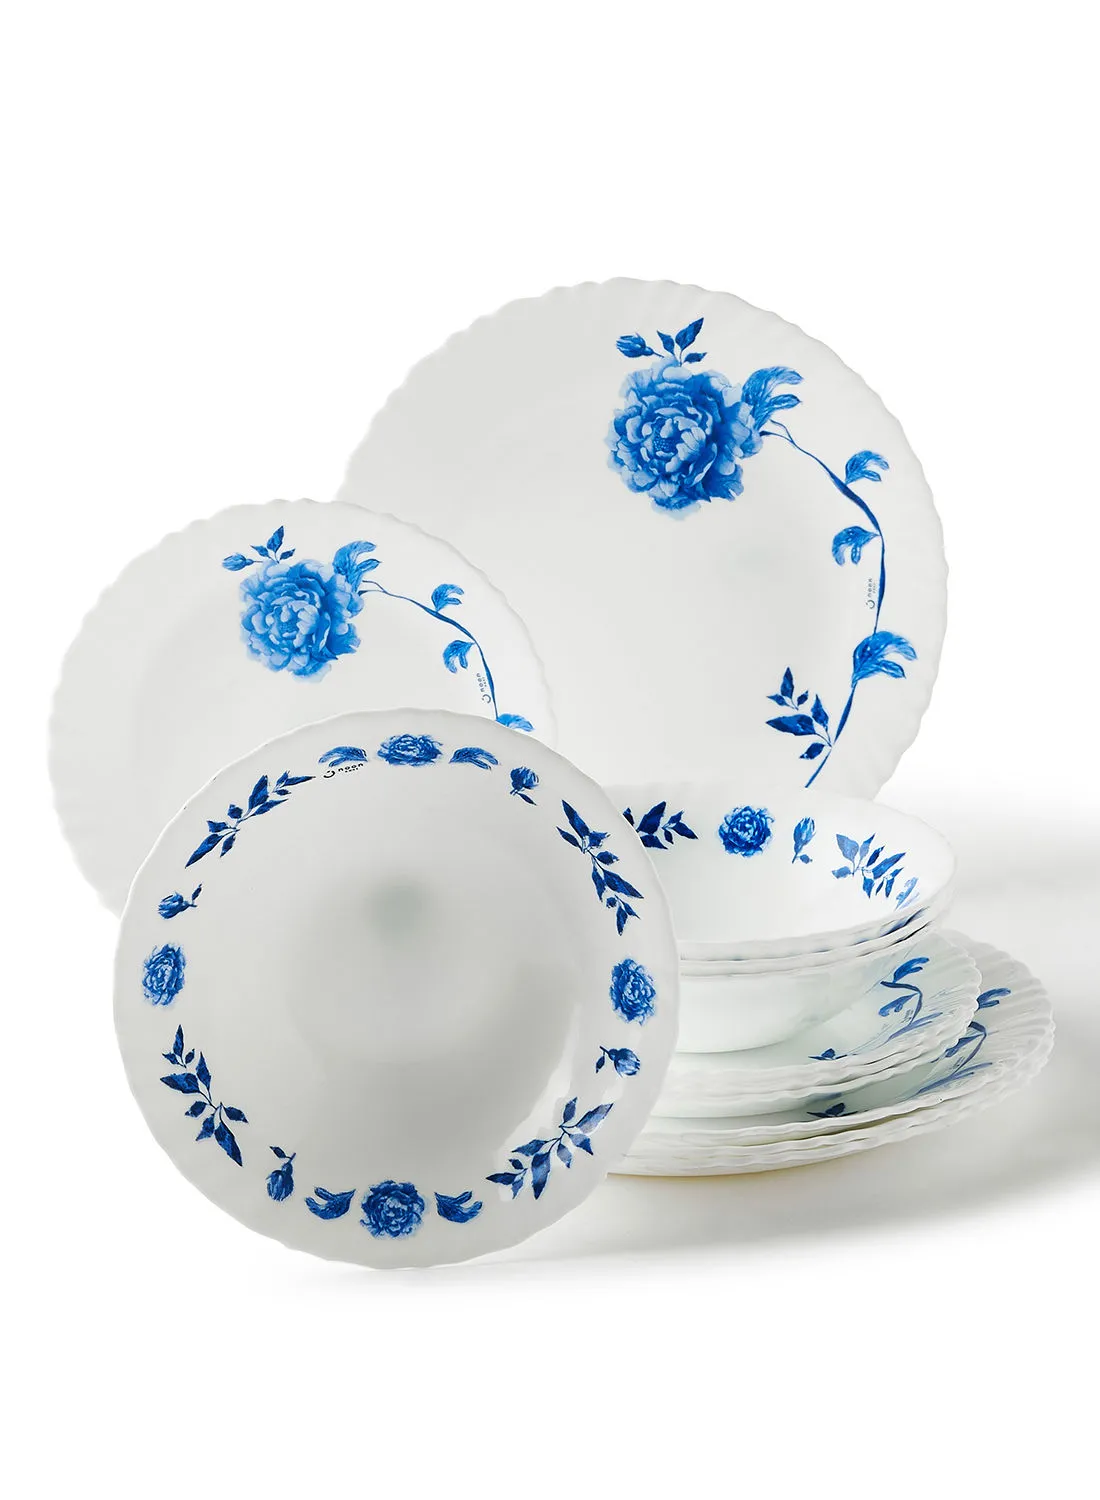 noon east 12 Piece Opalware Dinner Set For Everyday Use - Light Weight Dishes, Plates - Dinner Plate, Side Plate, Bowl - Serves 4 - Printed Design Eloni